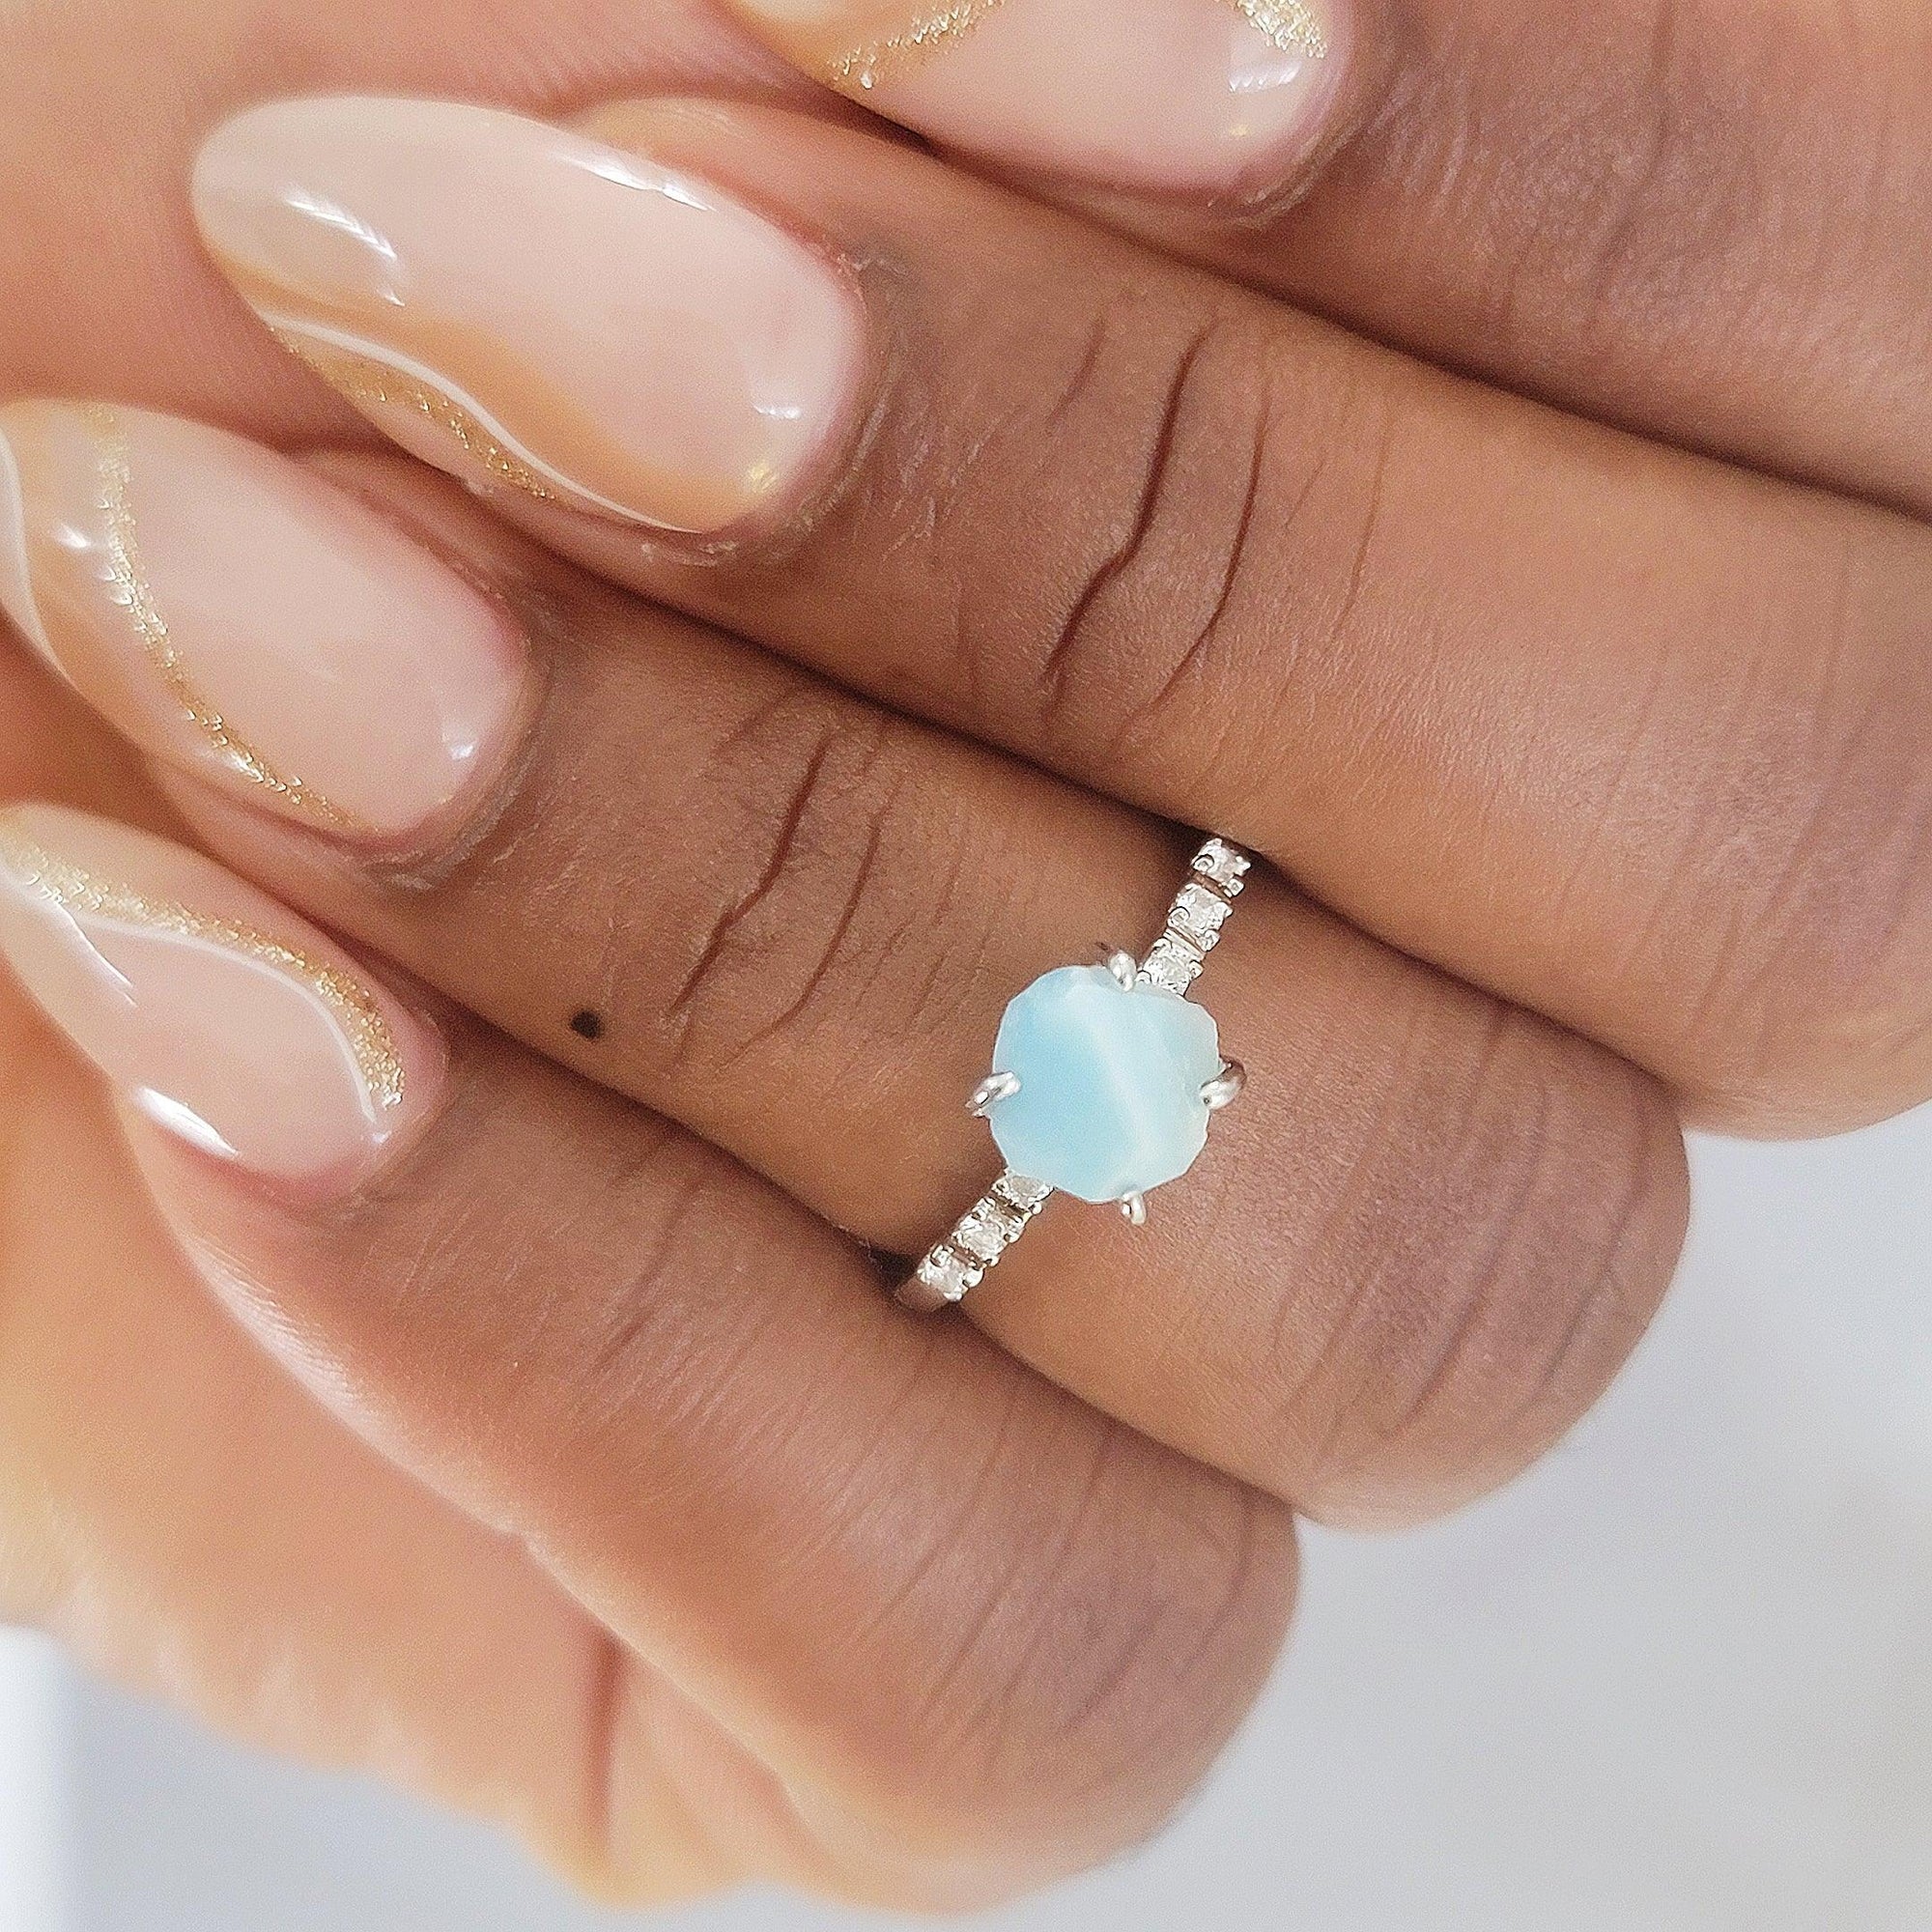 Raw Larimar Ring and Stud Earring Set - Uniquelan Jewelry